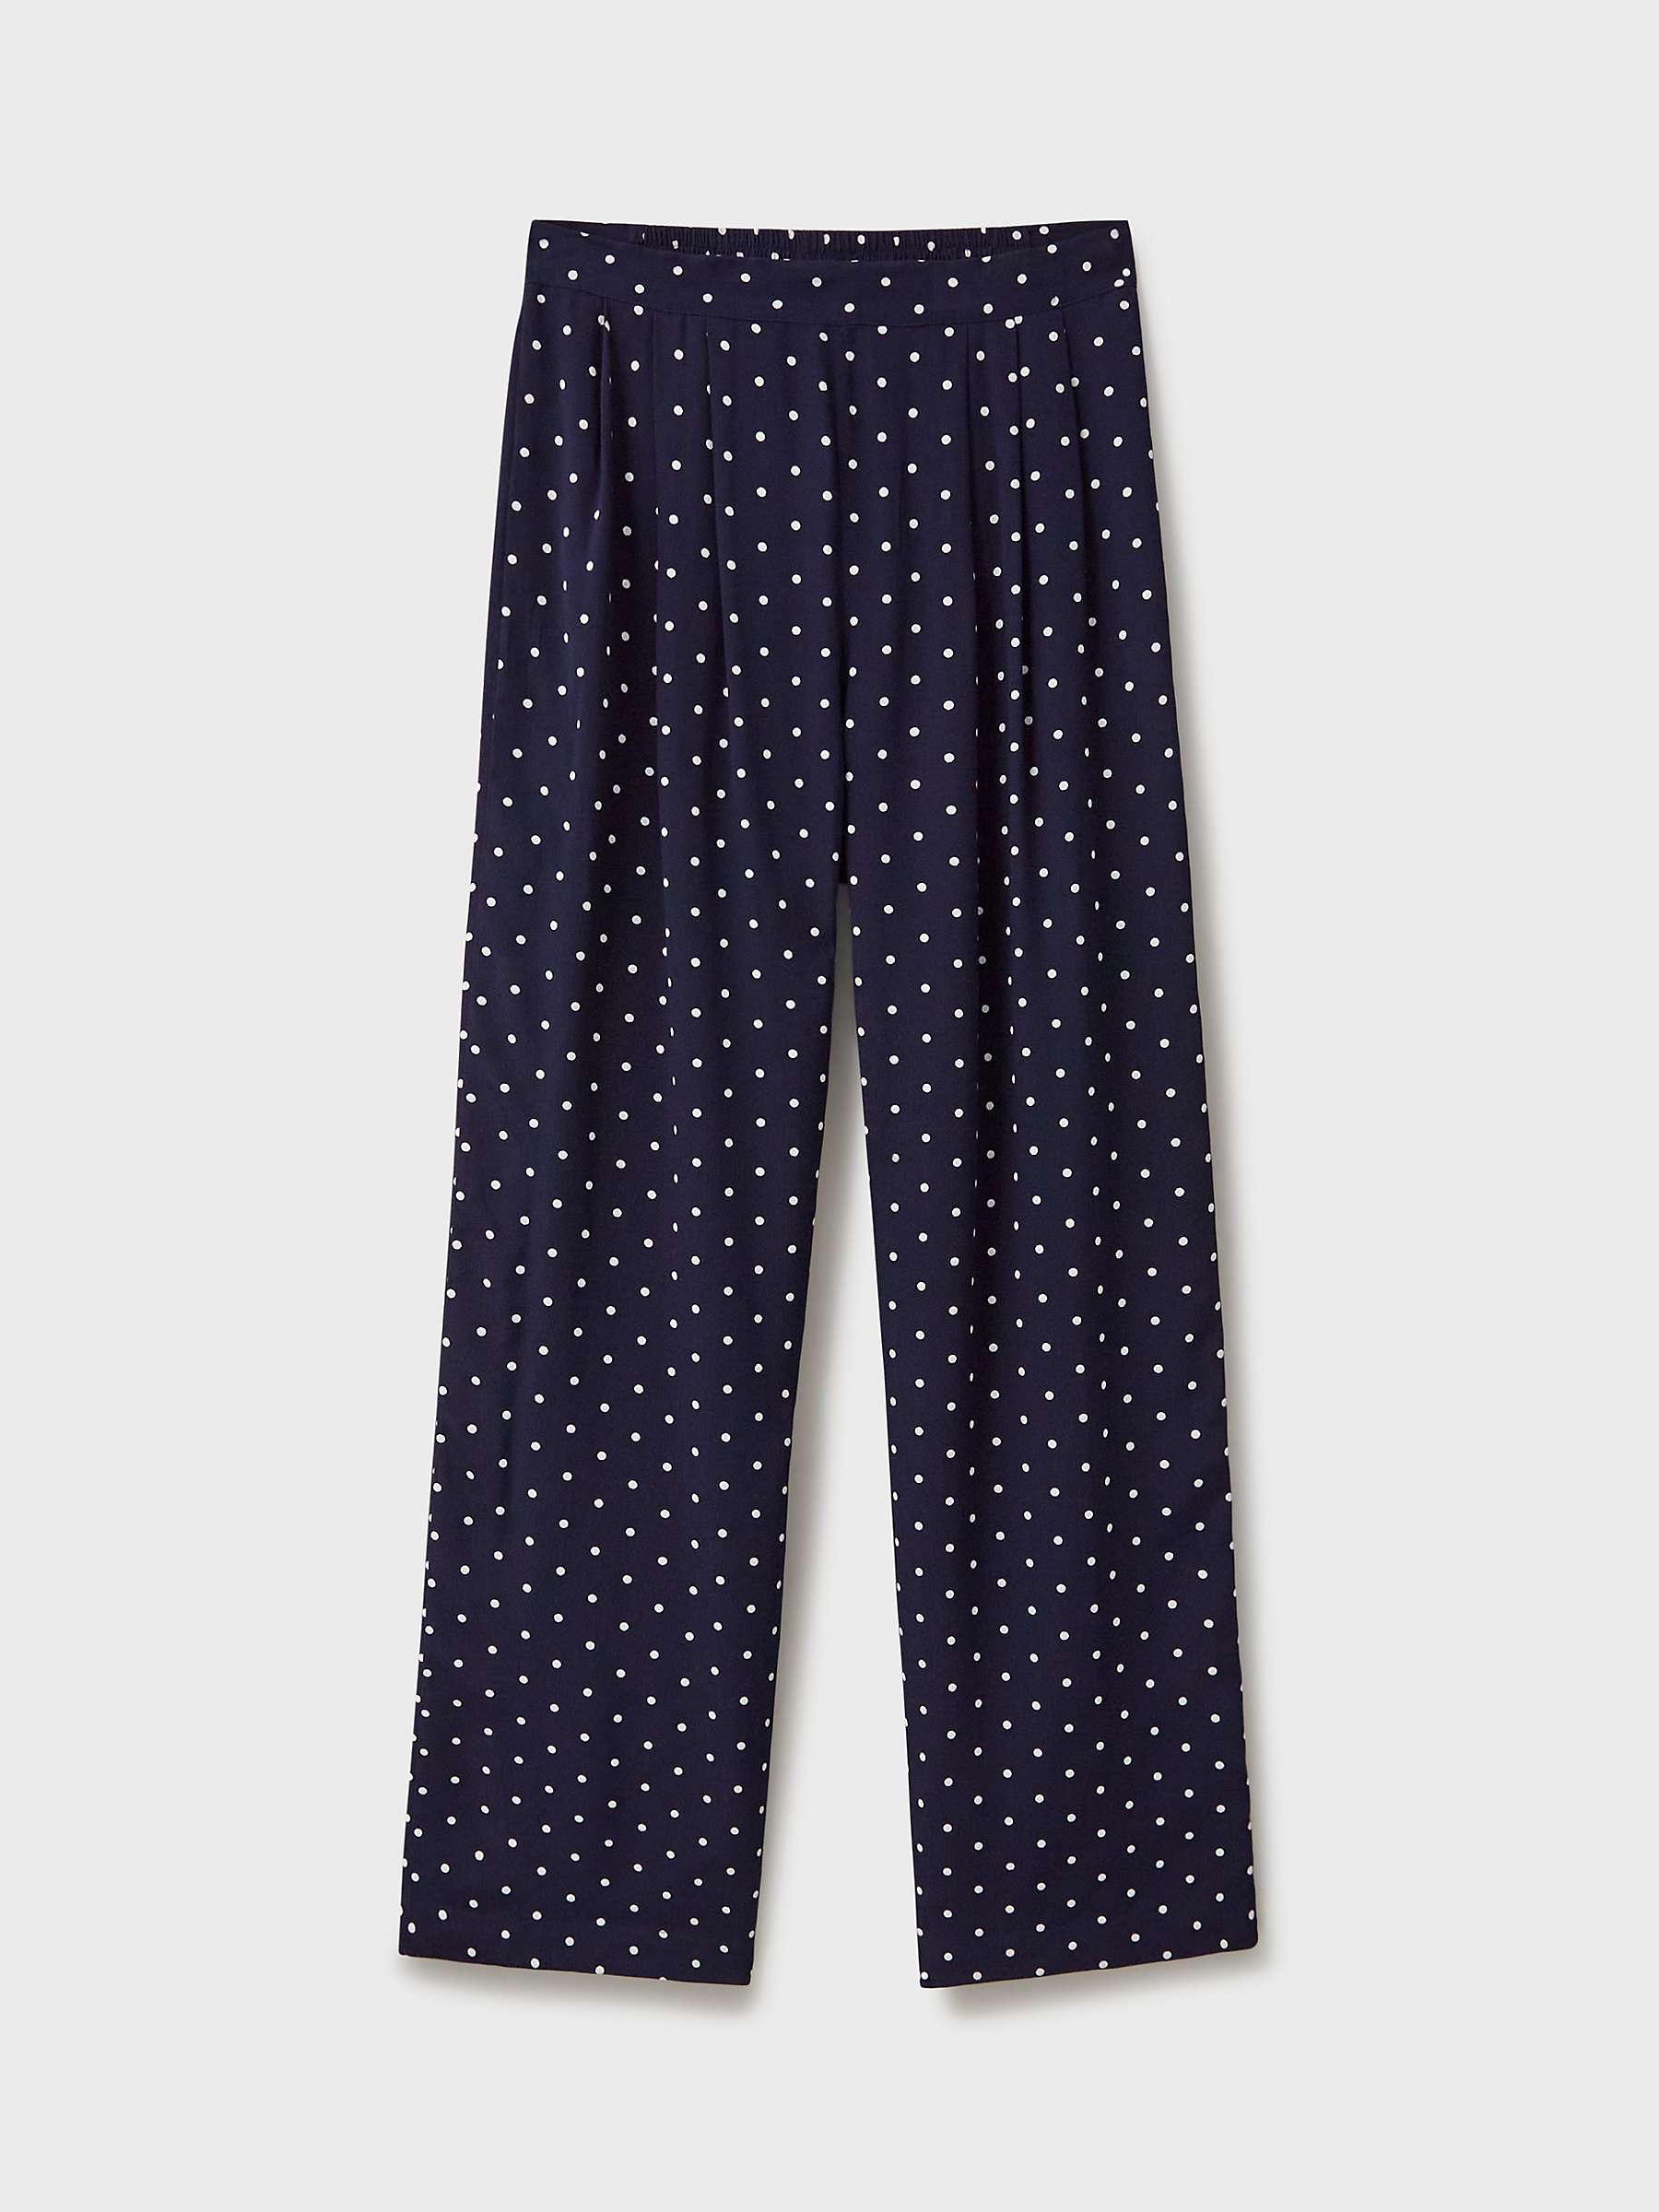 Buy Crew Clothing Dion Wide Leg Polka Dot Trousers, Navy/White Online at johnlewis.com